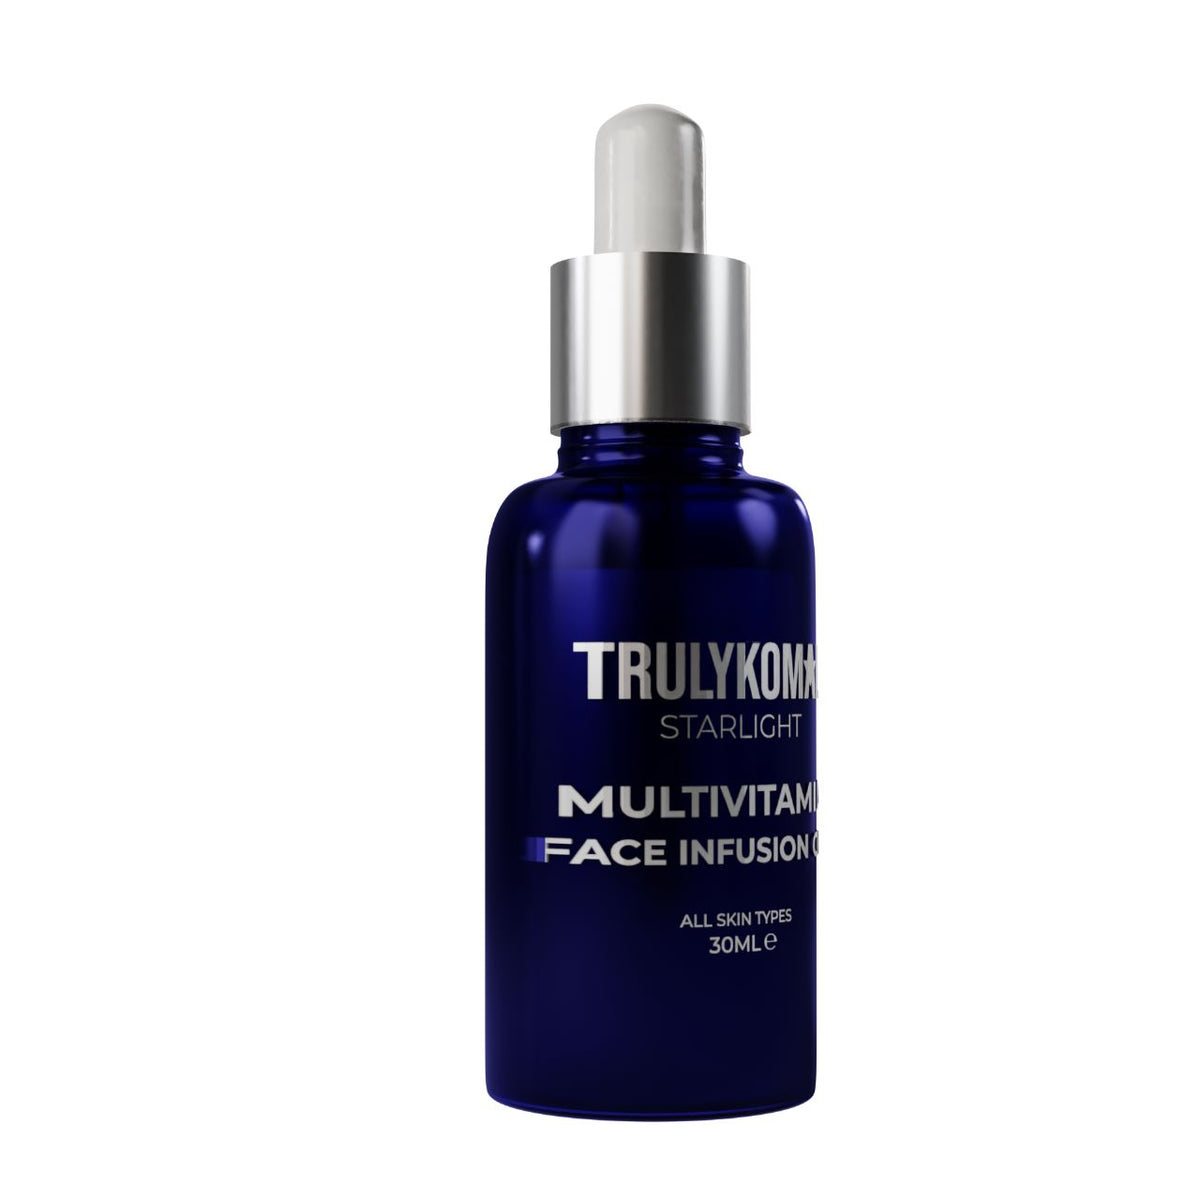 Buy  TrulyKomal Multi Vitamin Face Infusion Serum - 30ml - at Best Price Online in Pakistan